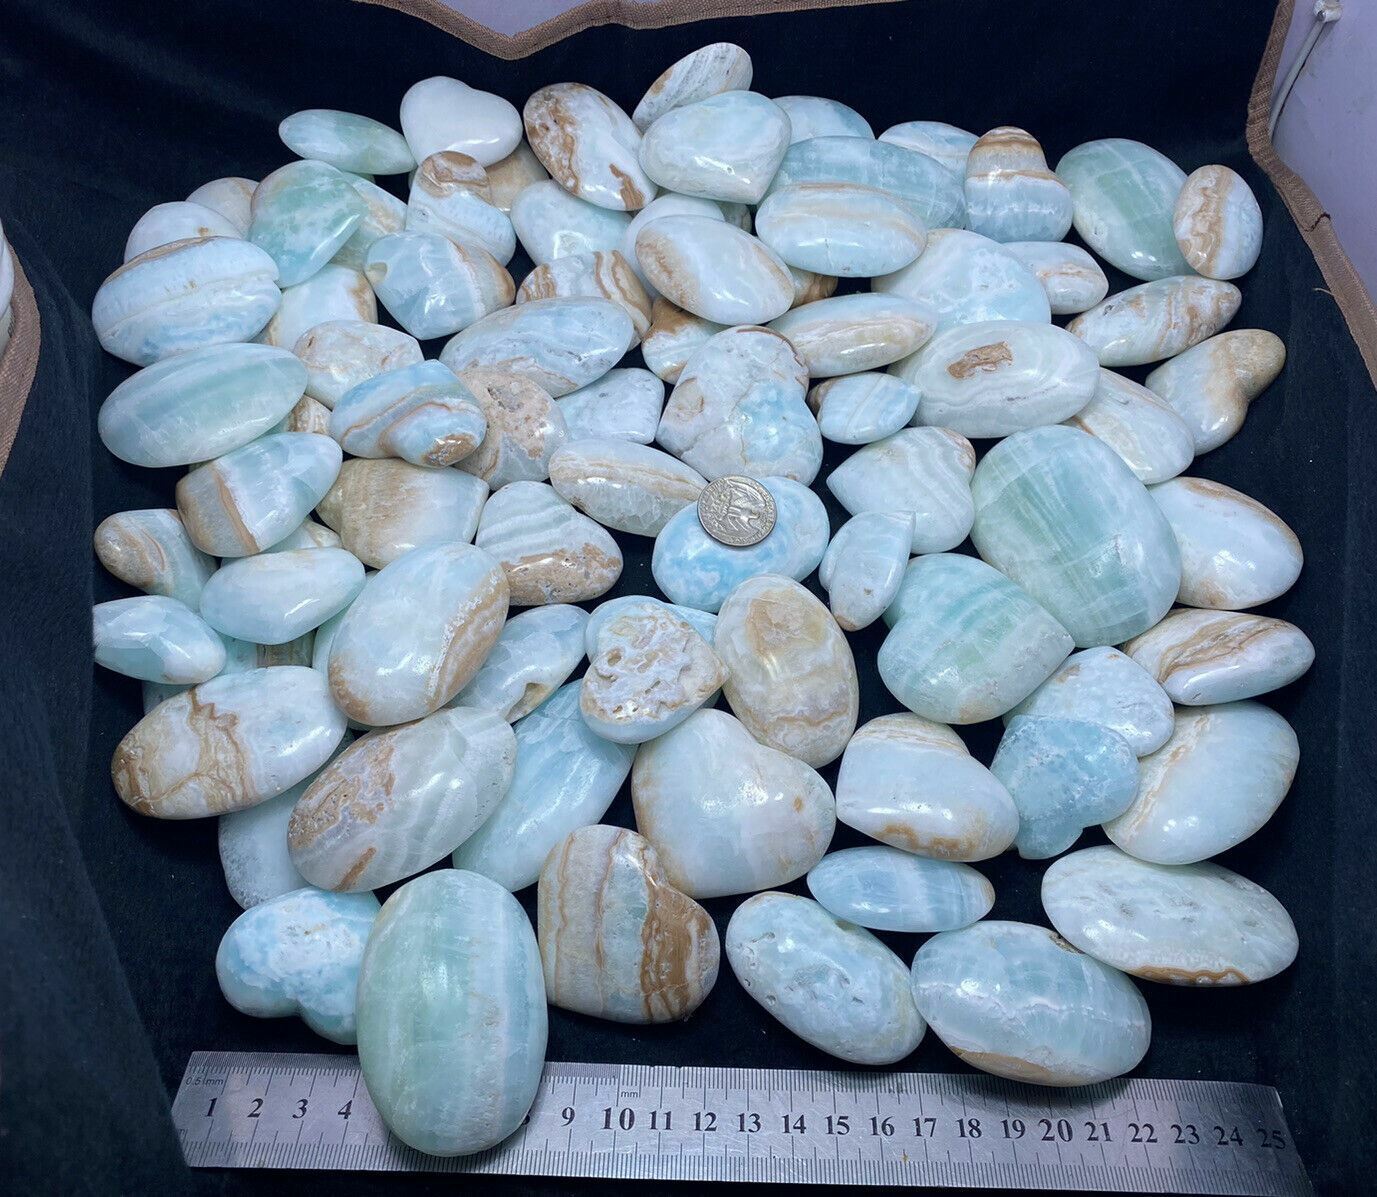 Caribbean Blue Calcite 84 Pcs 5100 gm Top Quality Mixed Hearts & Palm worry lot